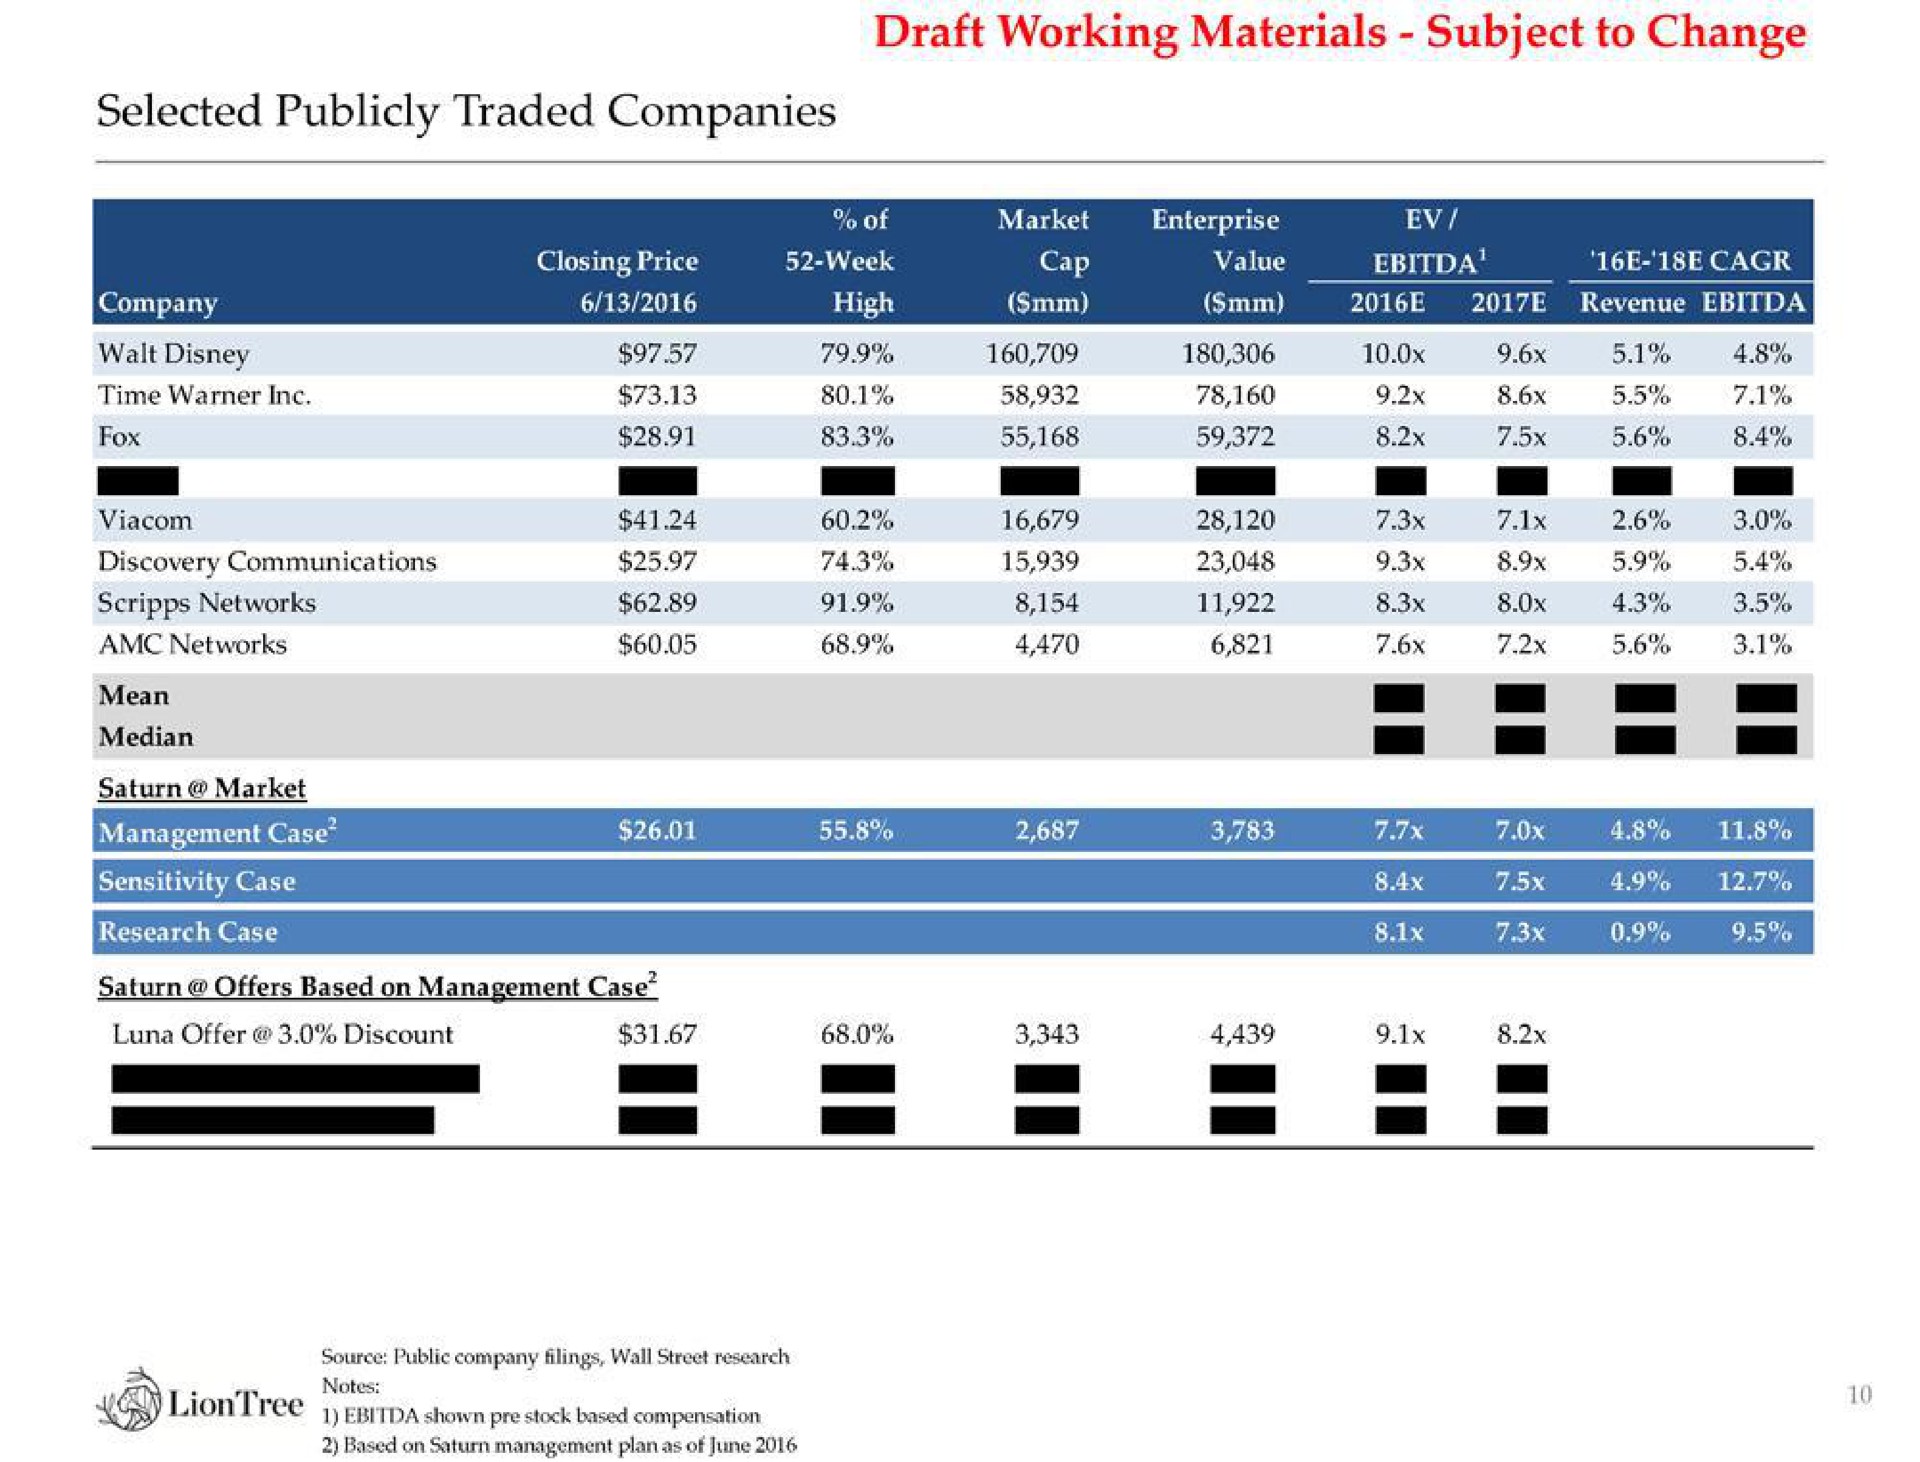 selected publicly traded companies draft working materials subject to change | LionTree